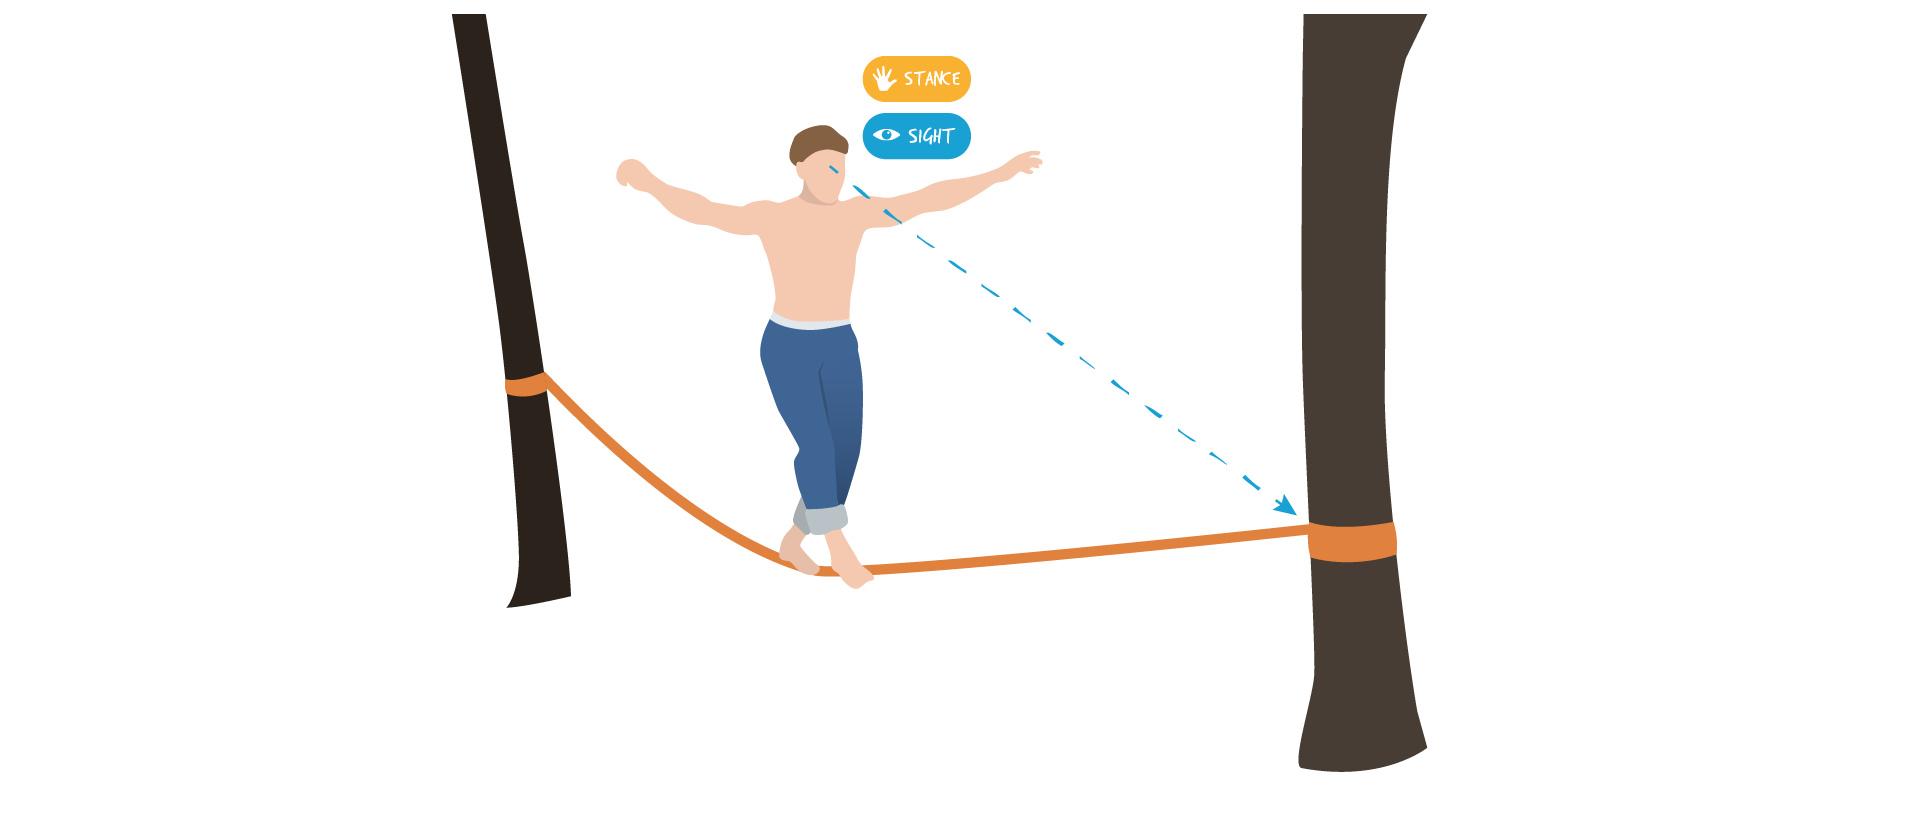 Ends of an orange rope is tied to two trees. Person in blue jeans is tightrope walking across. Blue rotten line is going from his face to the end of the rope. To the right of the face is a yellow oval with a hand and the word Stance inside, and a blue oval with an eye and the word Sight inside.